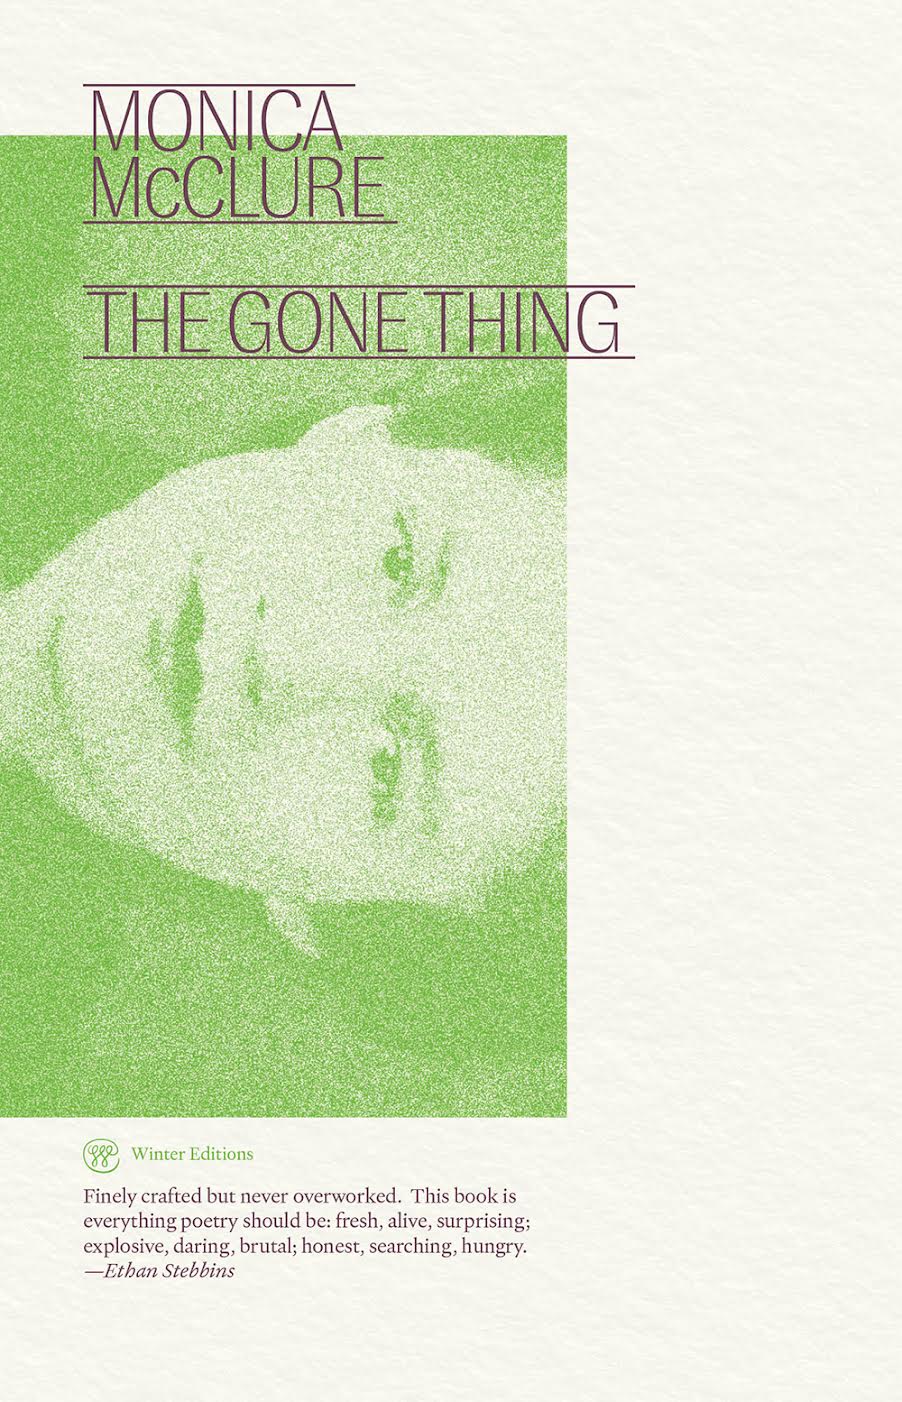 Book Launch: The Gone Thing by Monica McClure in conversation with Blythe Roberson